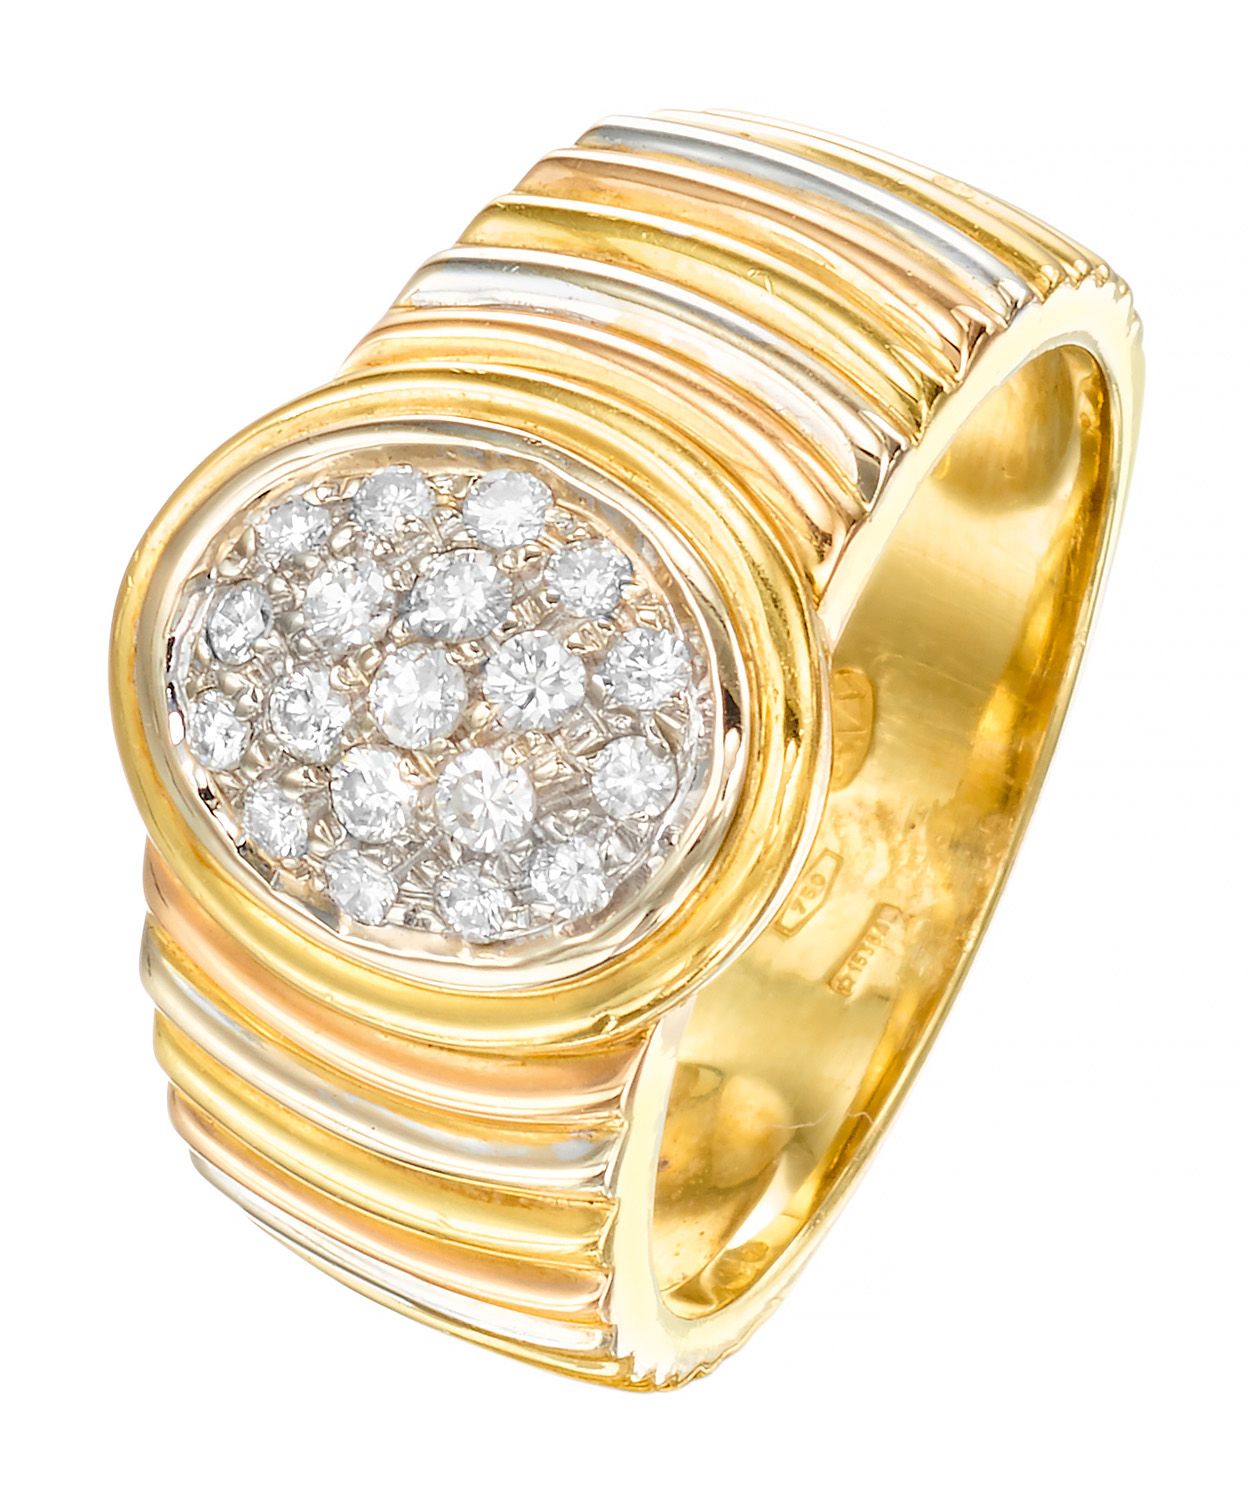 Bague bicolore Two-tone gold ring paved with brilliant cut diamonds